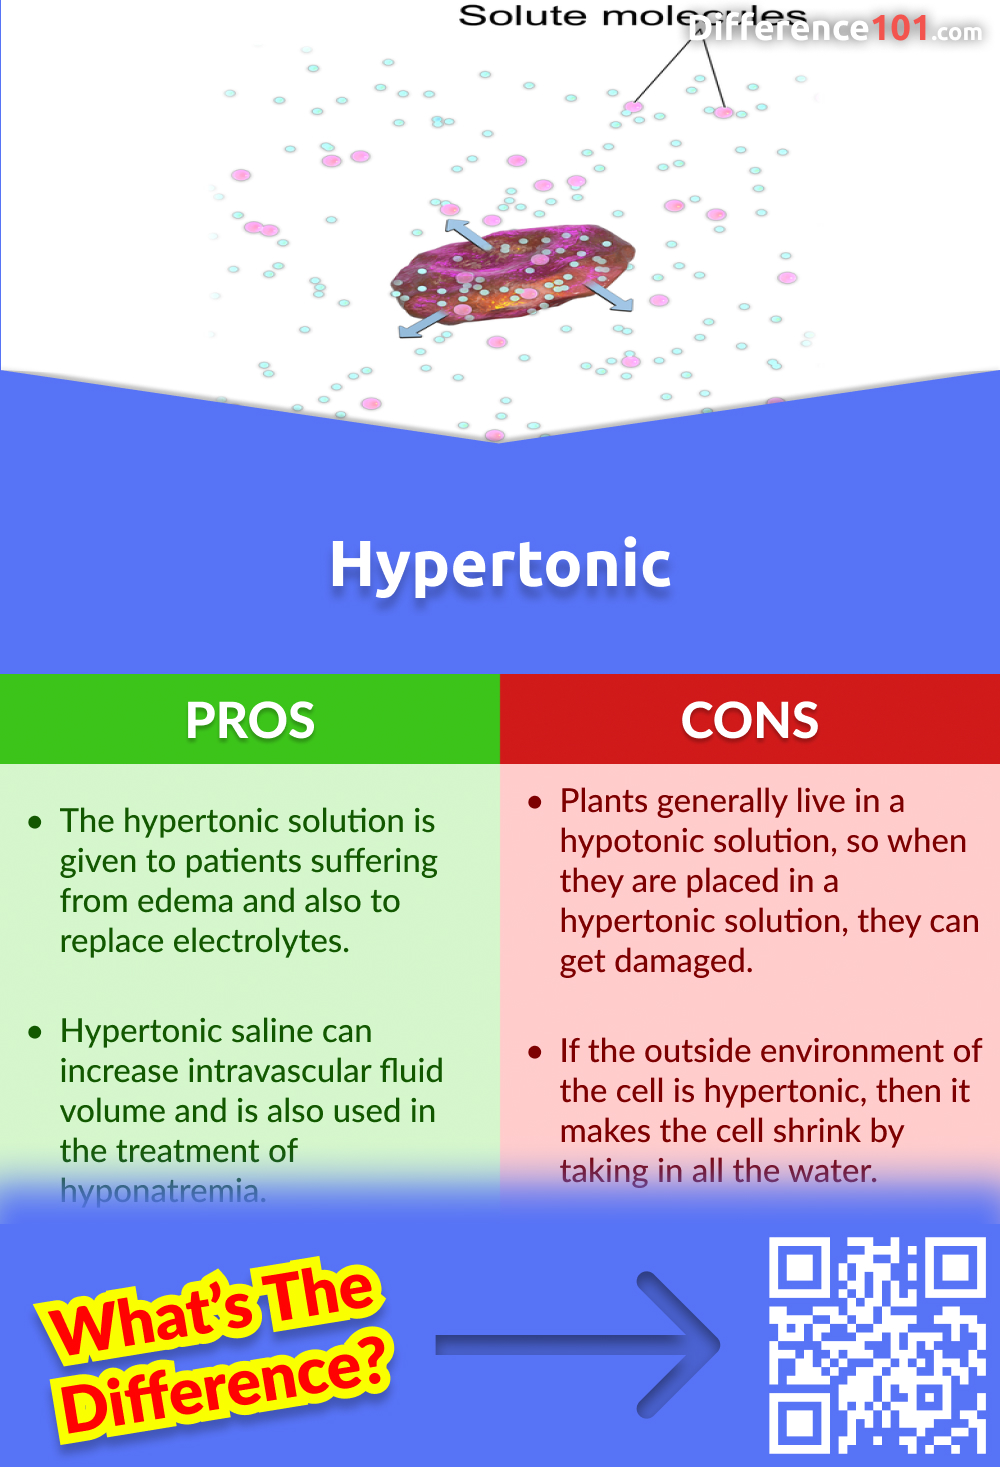 Hypertonic Pros and Cons